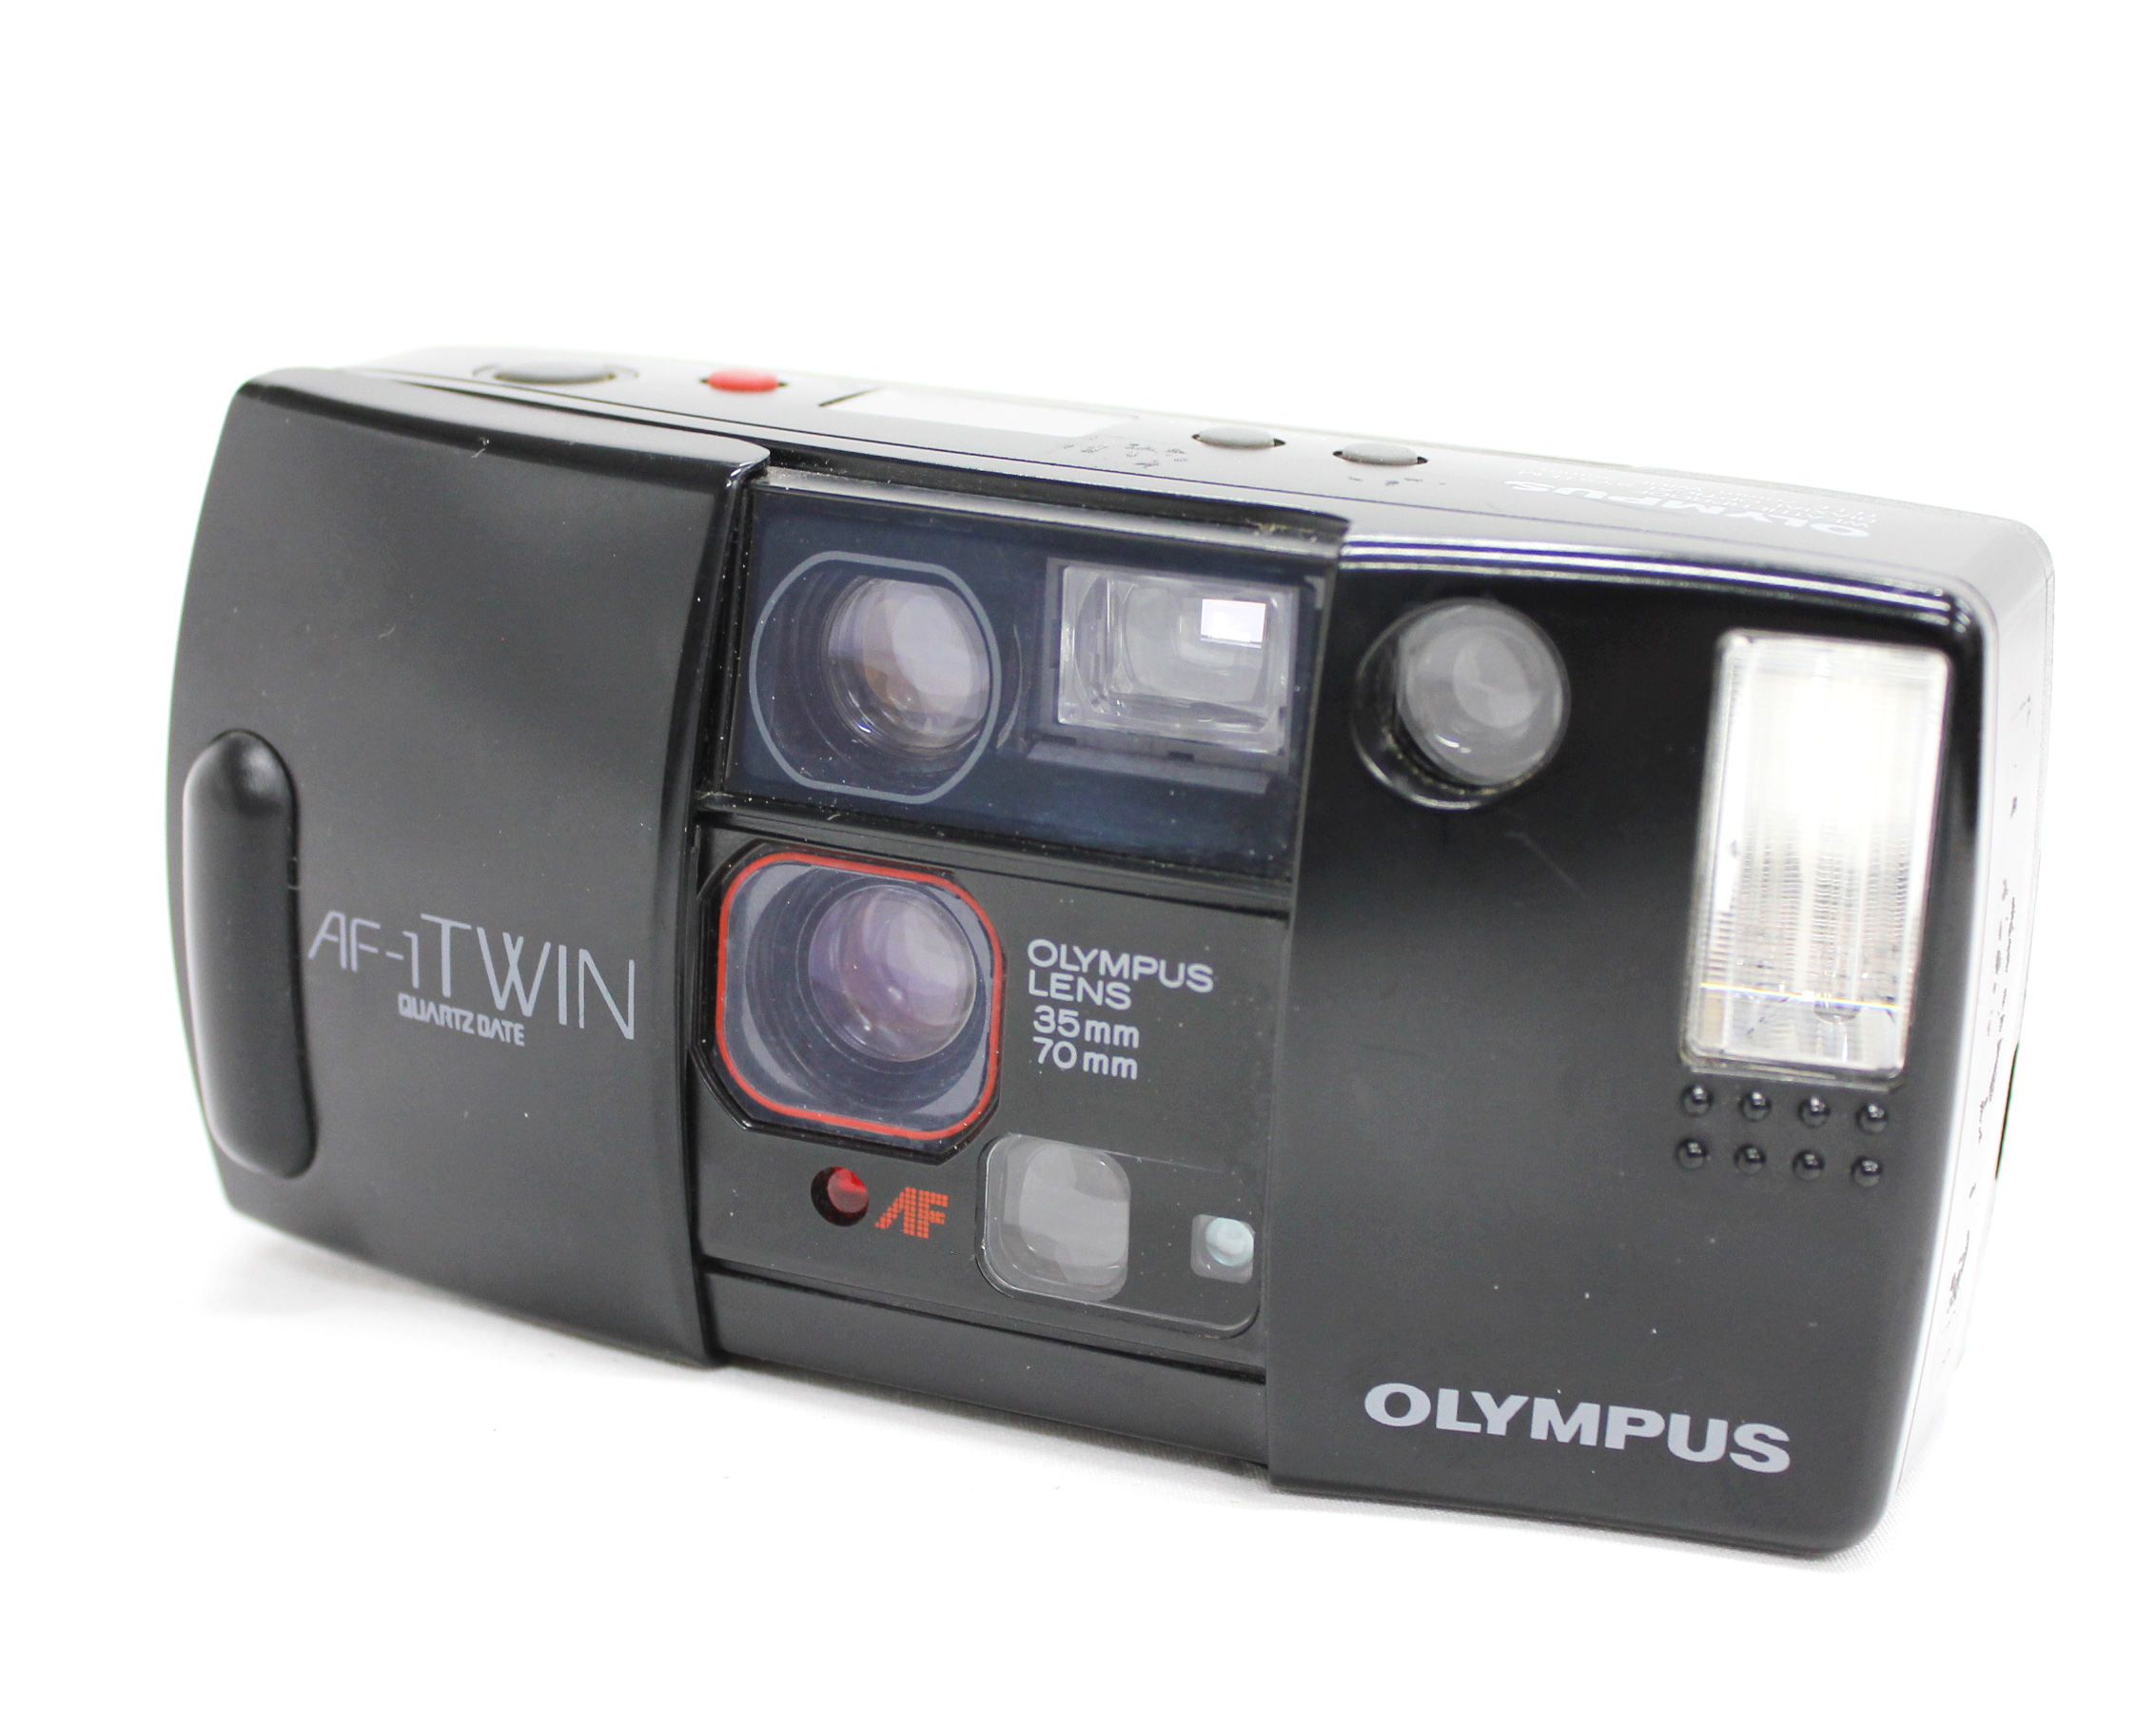 Japan Used Camera Shop | Olympus AF-1 Twin Point & Shoot 35mm Film Camera from Japan